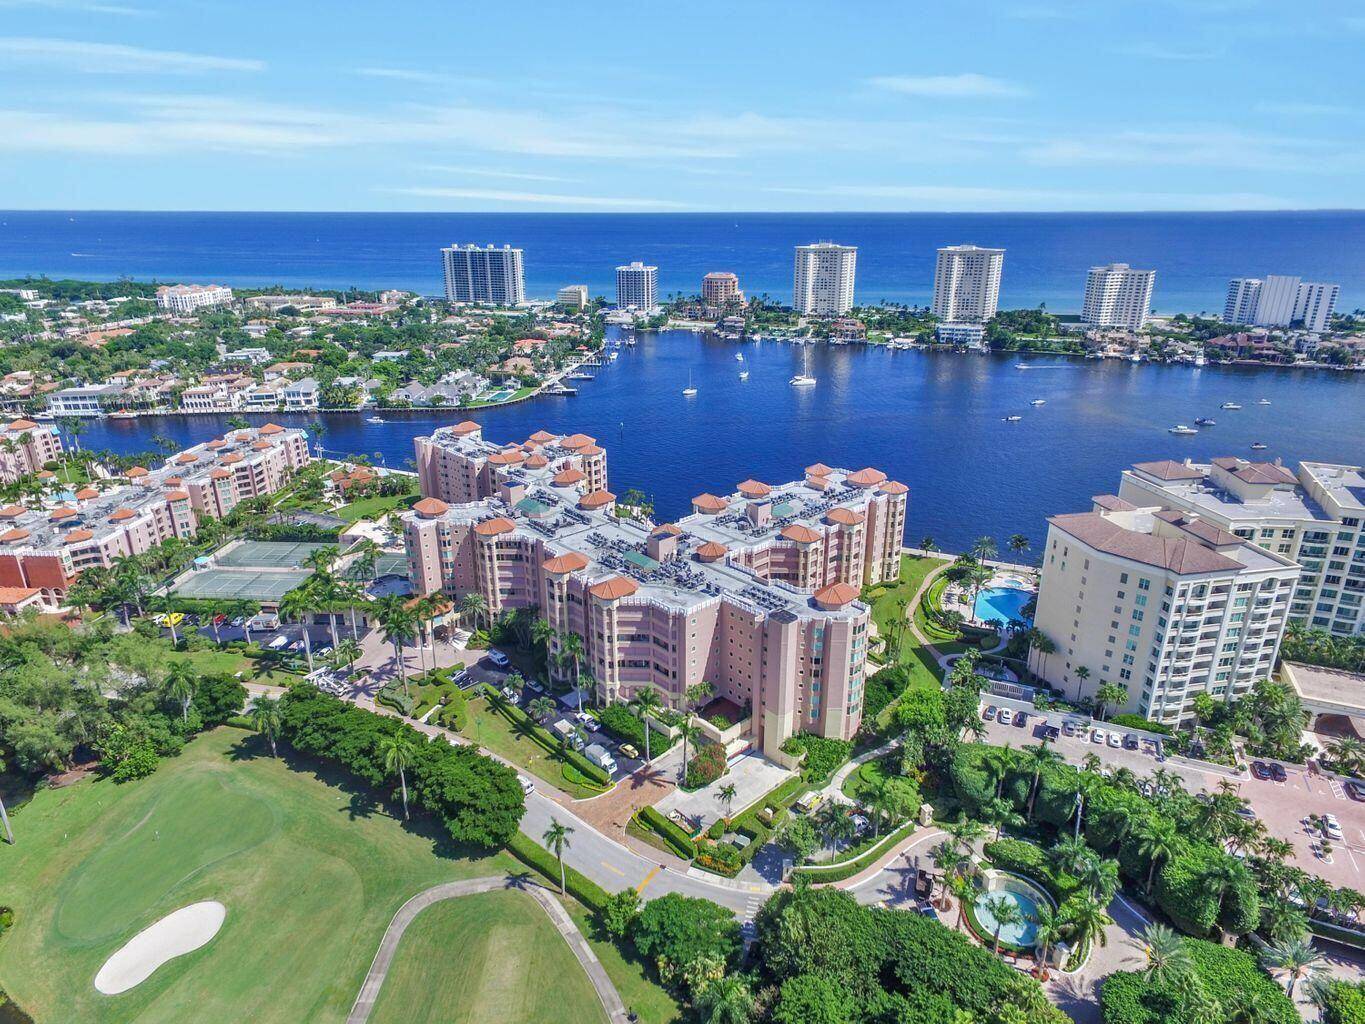 The premier residence at Mizner Tower, The Grandview situated directly on the Intracoastal waterway and Lake Boca has an expansive terrace and private patio.